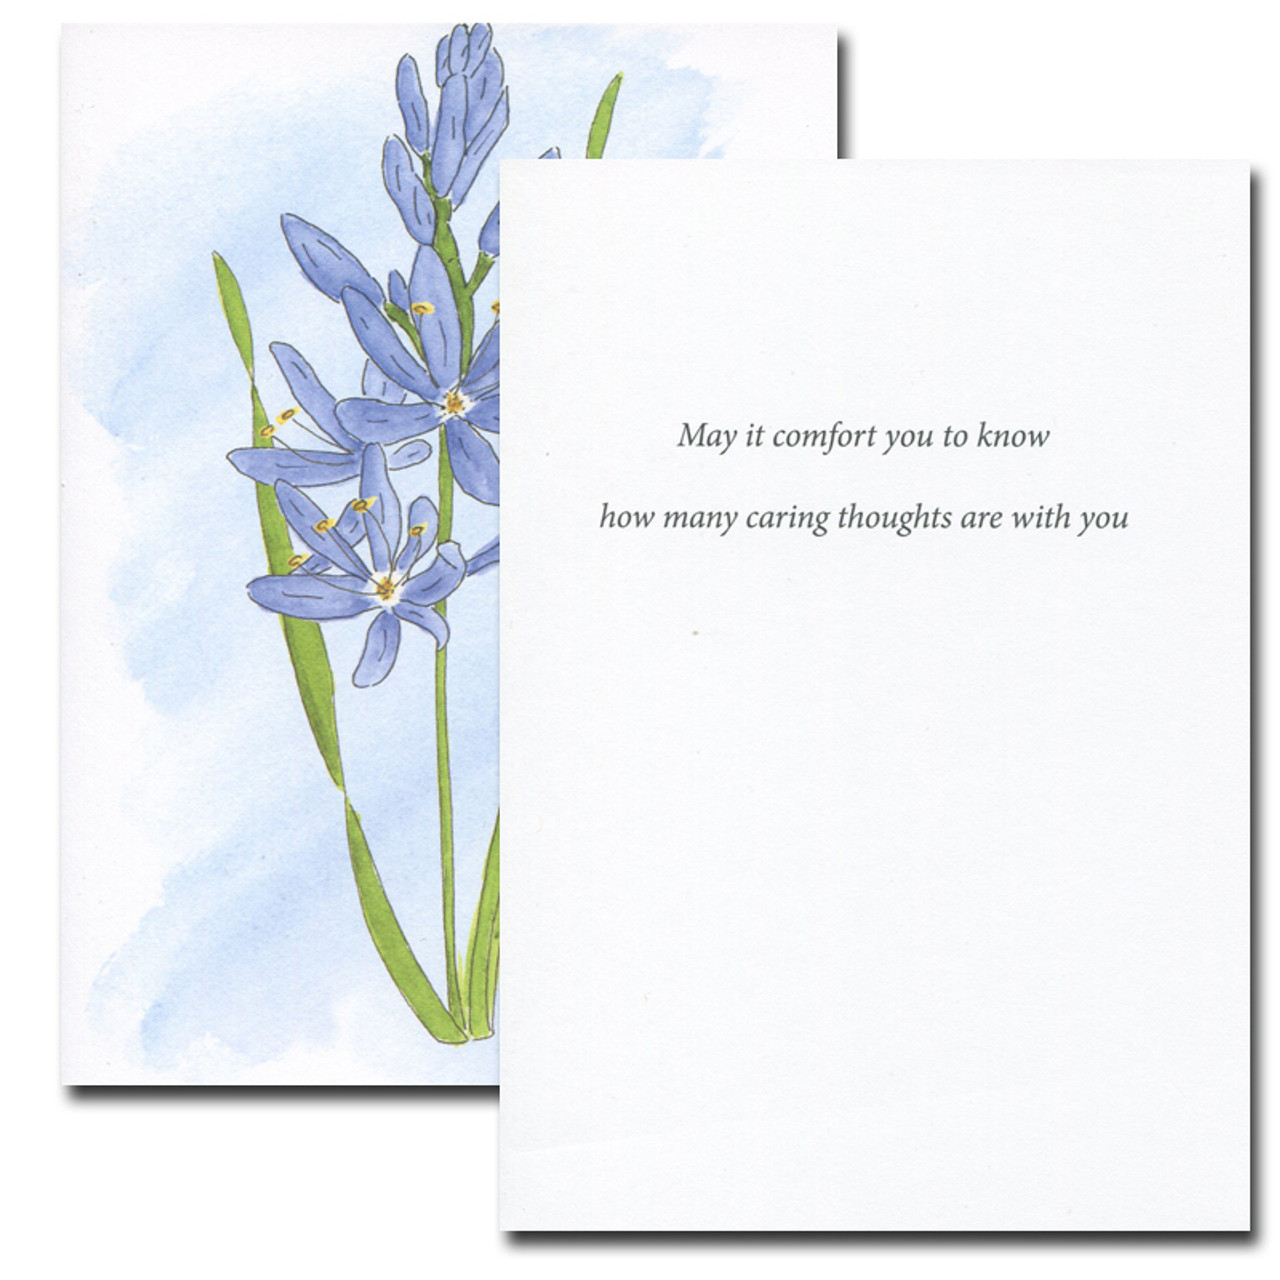 Inside of Wild Hyacinth Sympathy Card reads: May it comfort you to know how many caring thoughts are with you